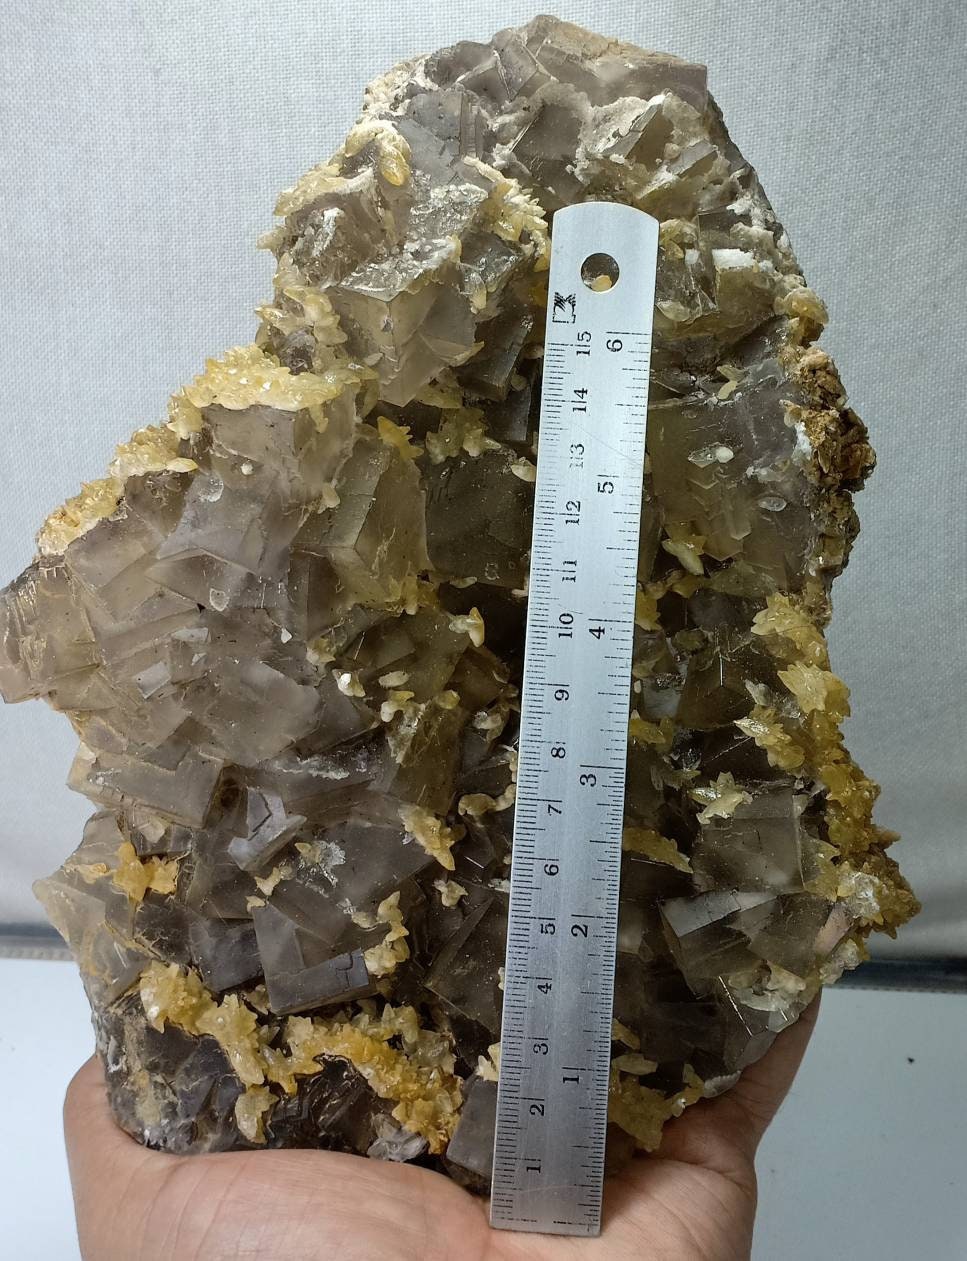 Beautiful Grey Color Fluorite plate with Dogteeth calcite crystals 1580 grams